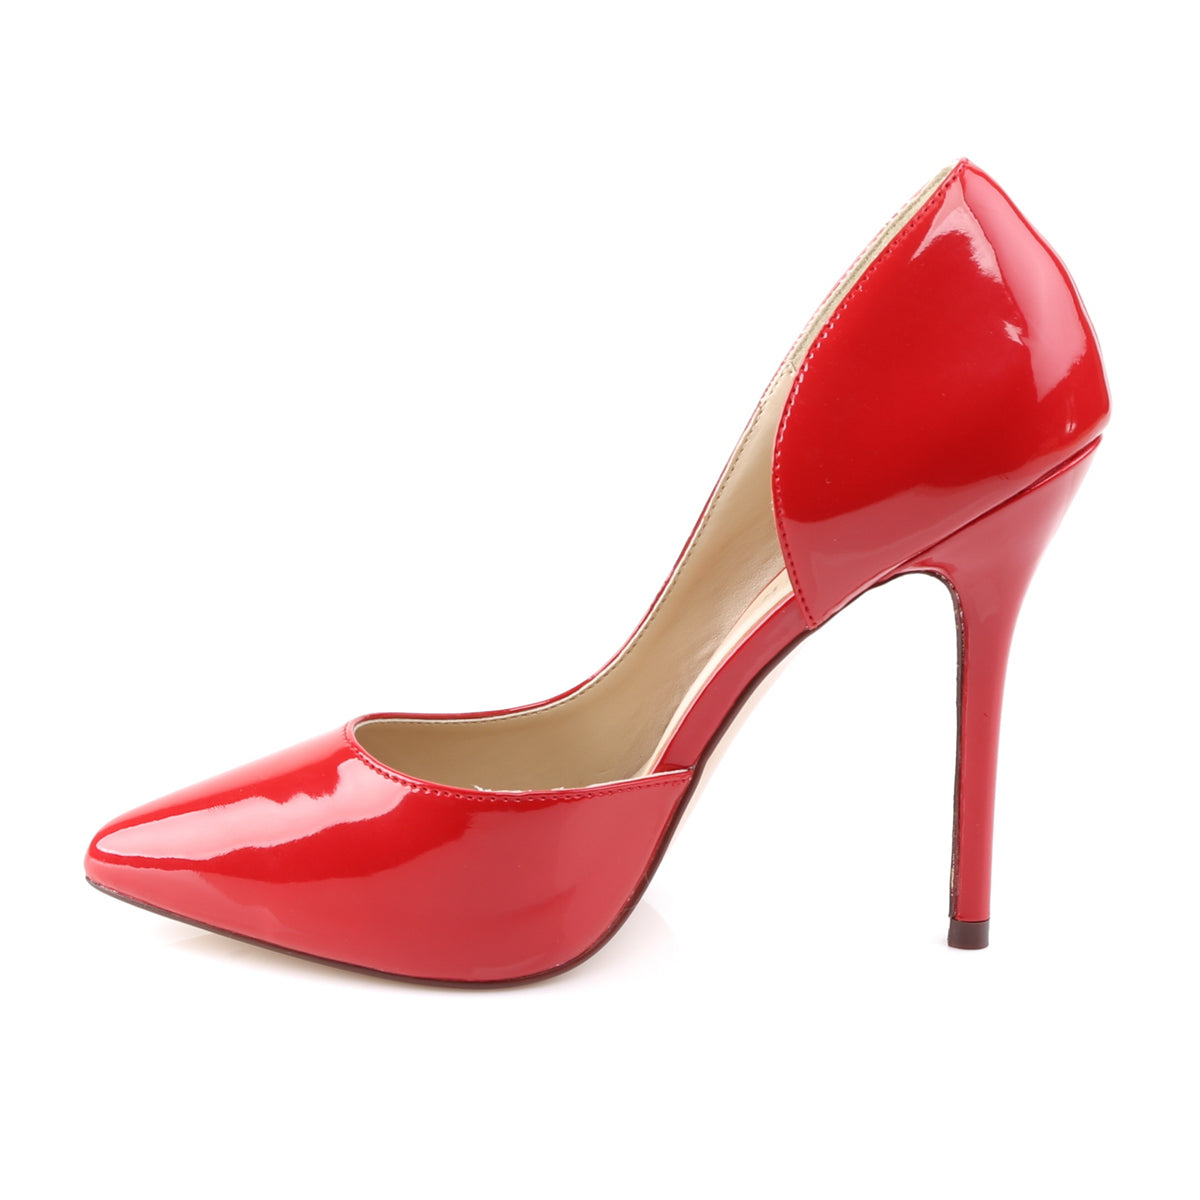 AMUSE-22 Pleaser Sexy 5 Inch Heel Red Fetish Footwear-Pleaser- Sexy Shoes Pole Dance Heels